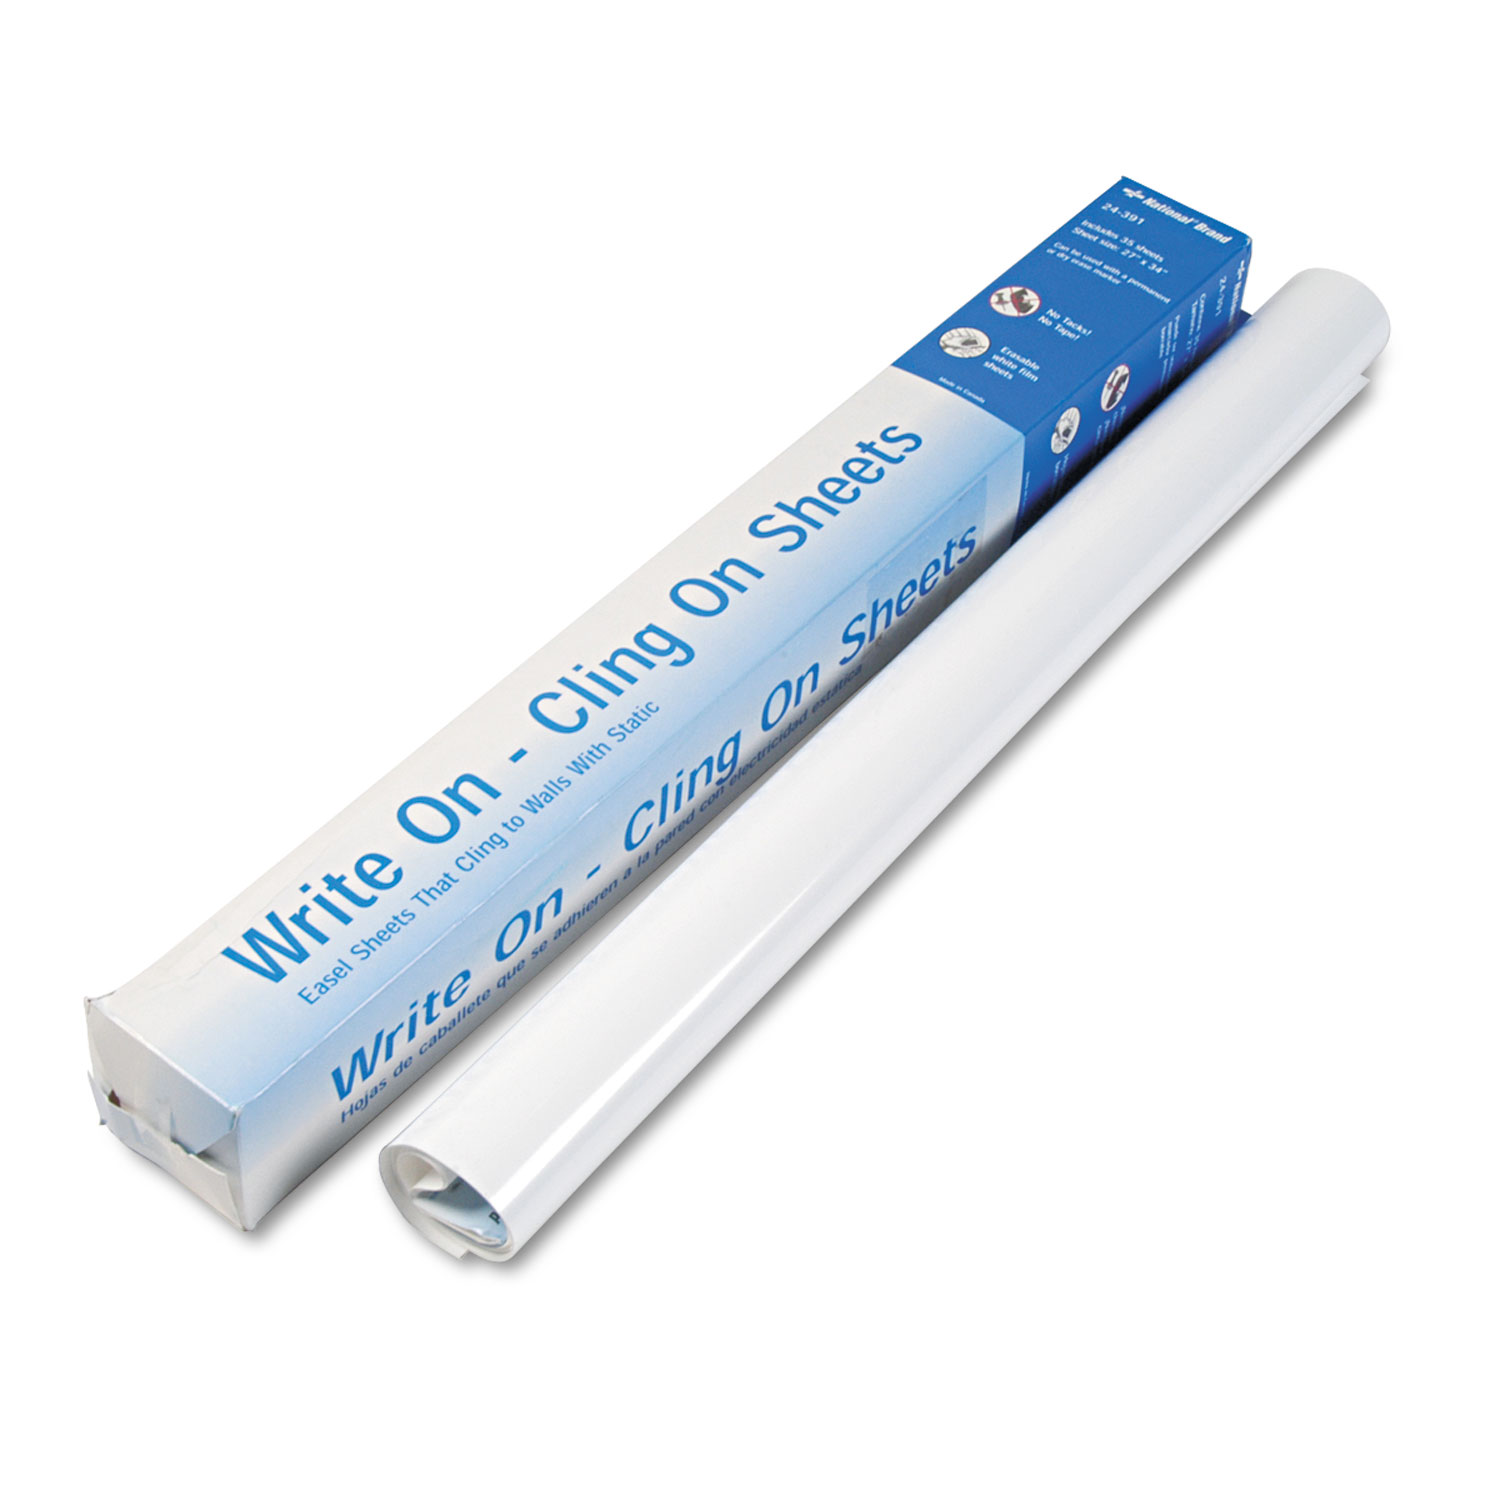 Write On-Cling On Easel Pad, 27 x 34, White, 35 Sheets